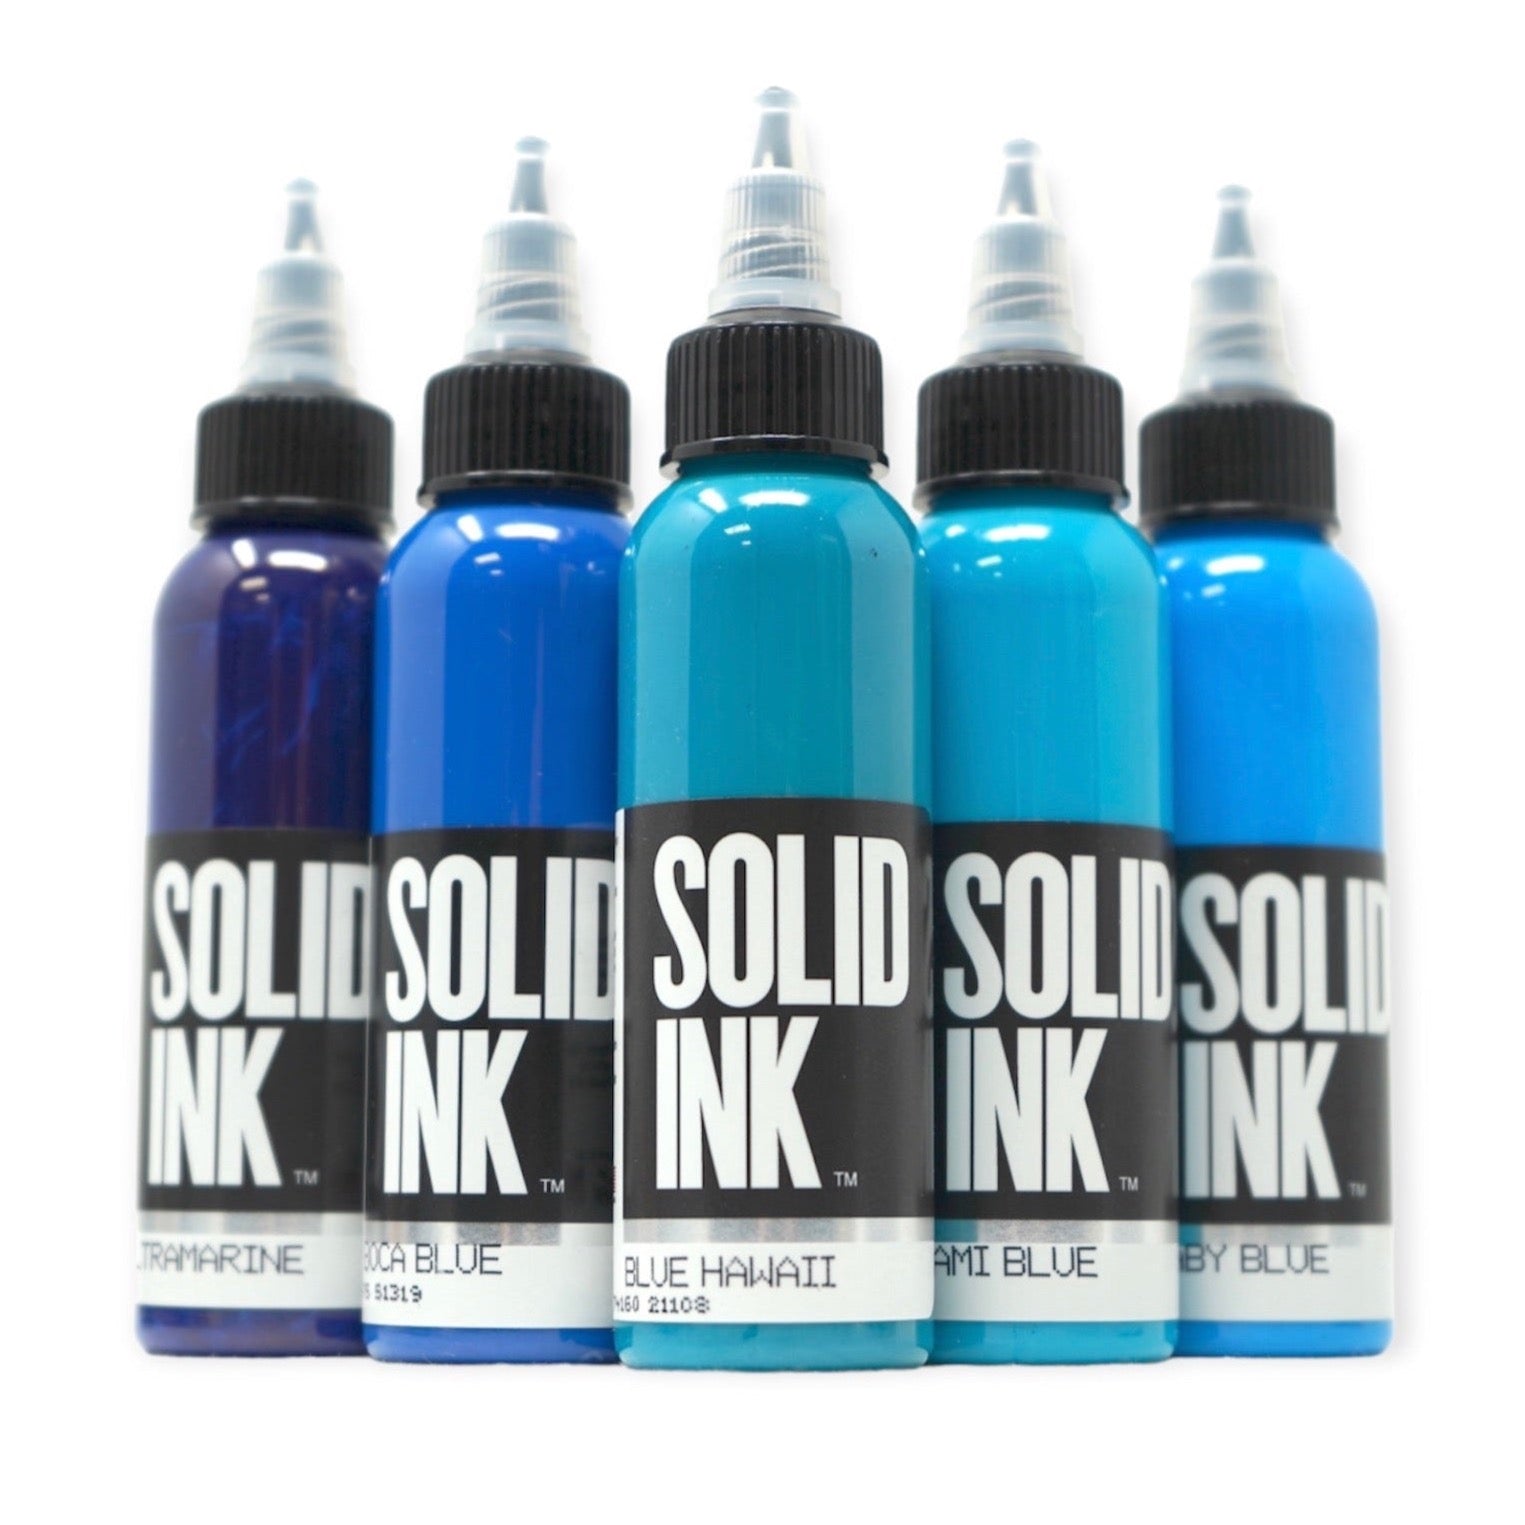 Solid 25 Color Tattoo Ink Set For Sale In-store & Online - Beacon Tattoo  Supply in Las Vegas, NV